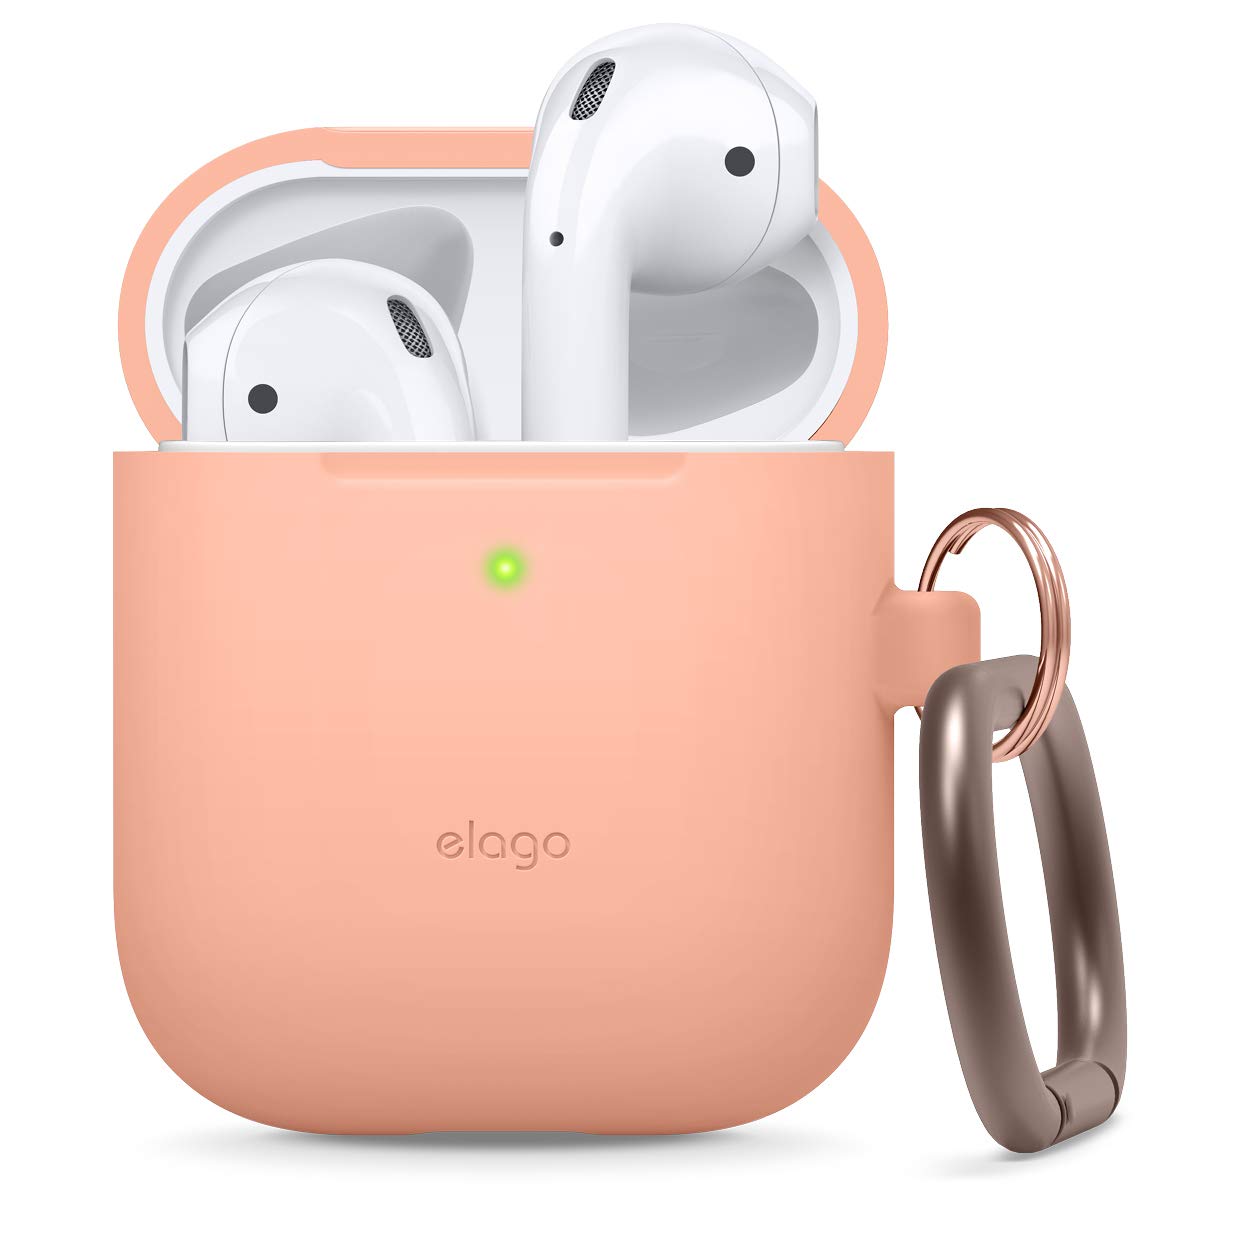 Book Cover elago Silicone Case with Keychain Compatible with Apple AirPods Case 1 & 2, Front LED Visible, Supports Wireless Charging, Protective Silicone [Peach]